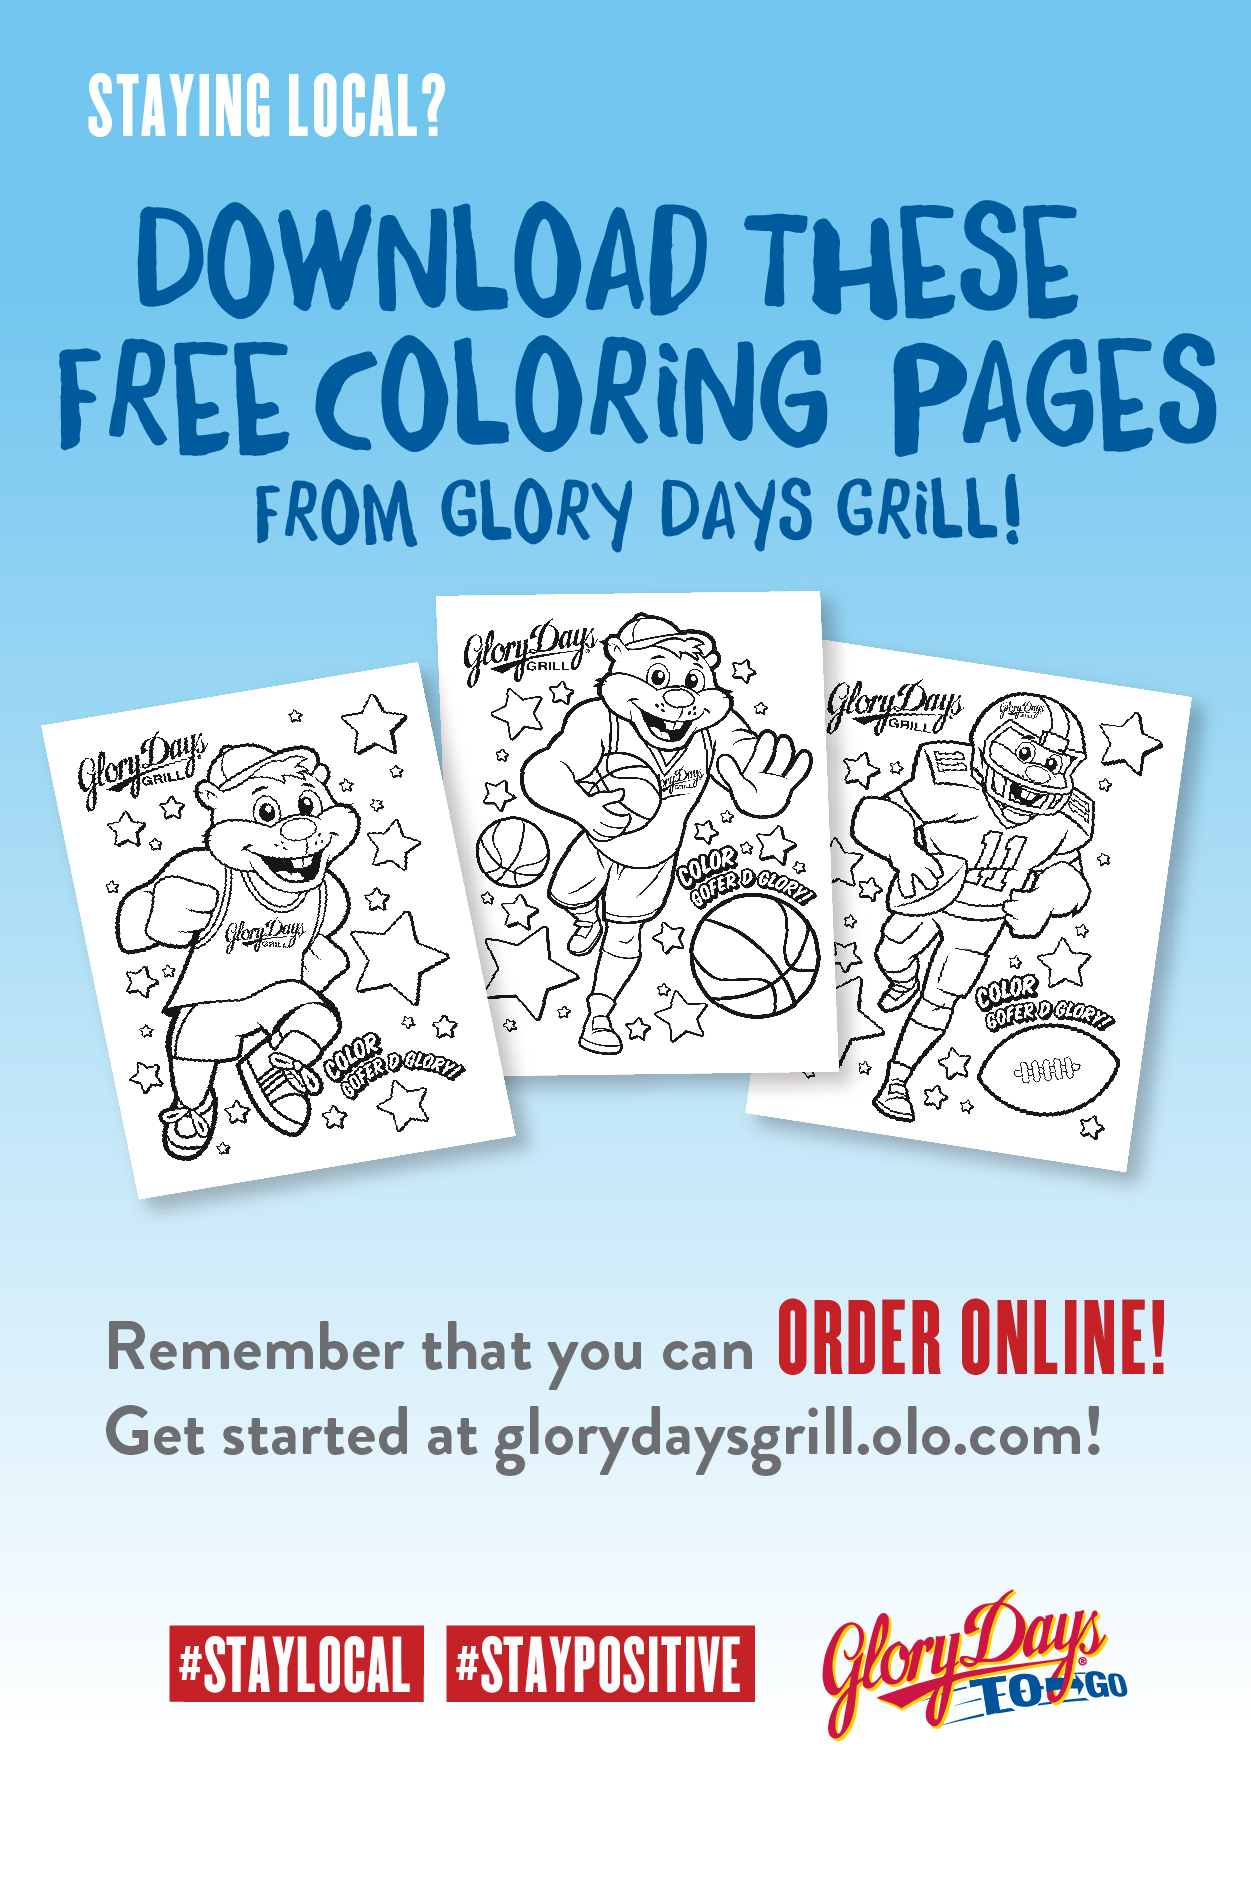 Download these free coloring pages from Glory Days Grill!